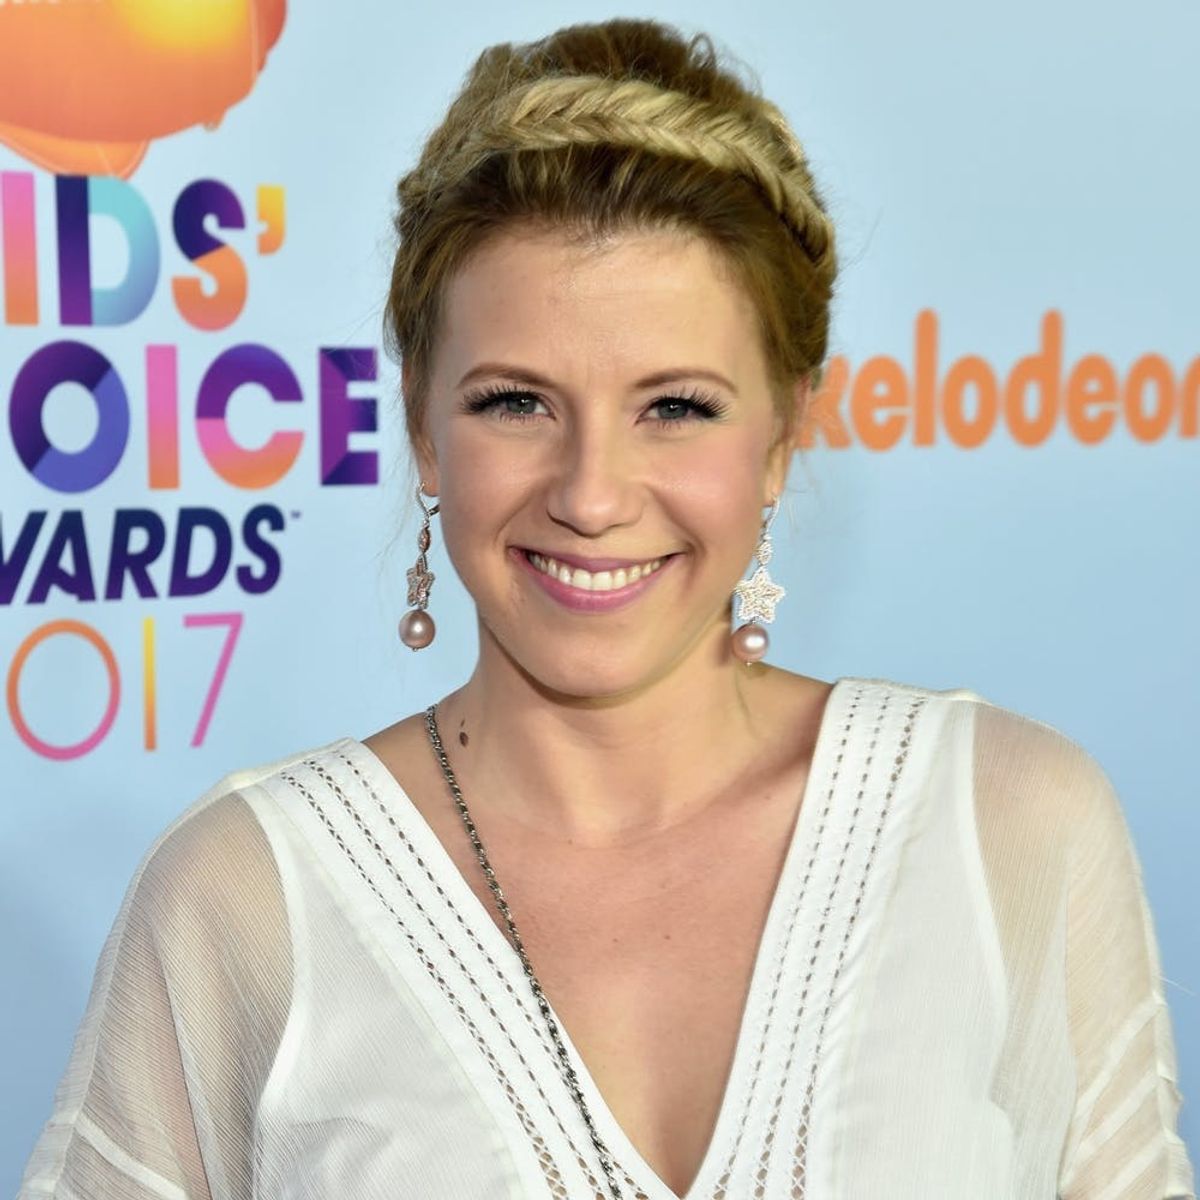 Jodie Sweetin Says She’s Never Watched an Entire Episode of “Full House”